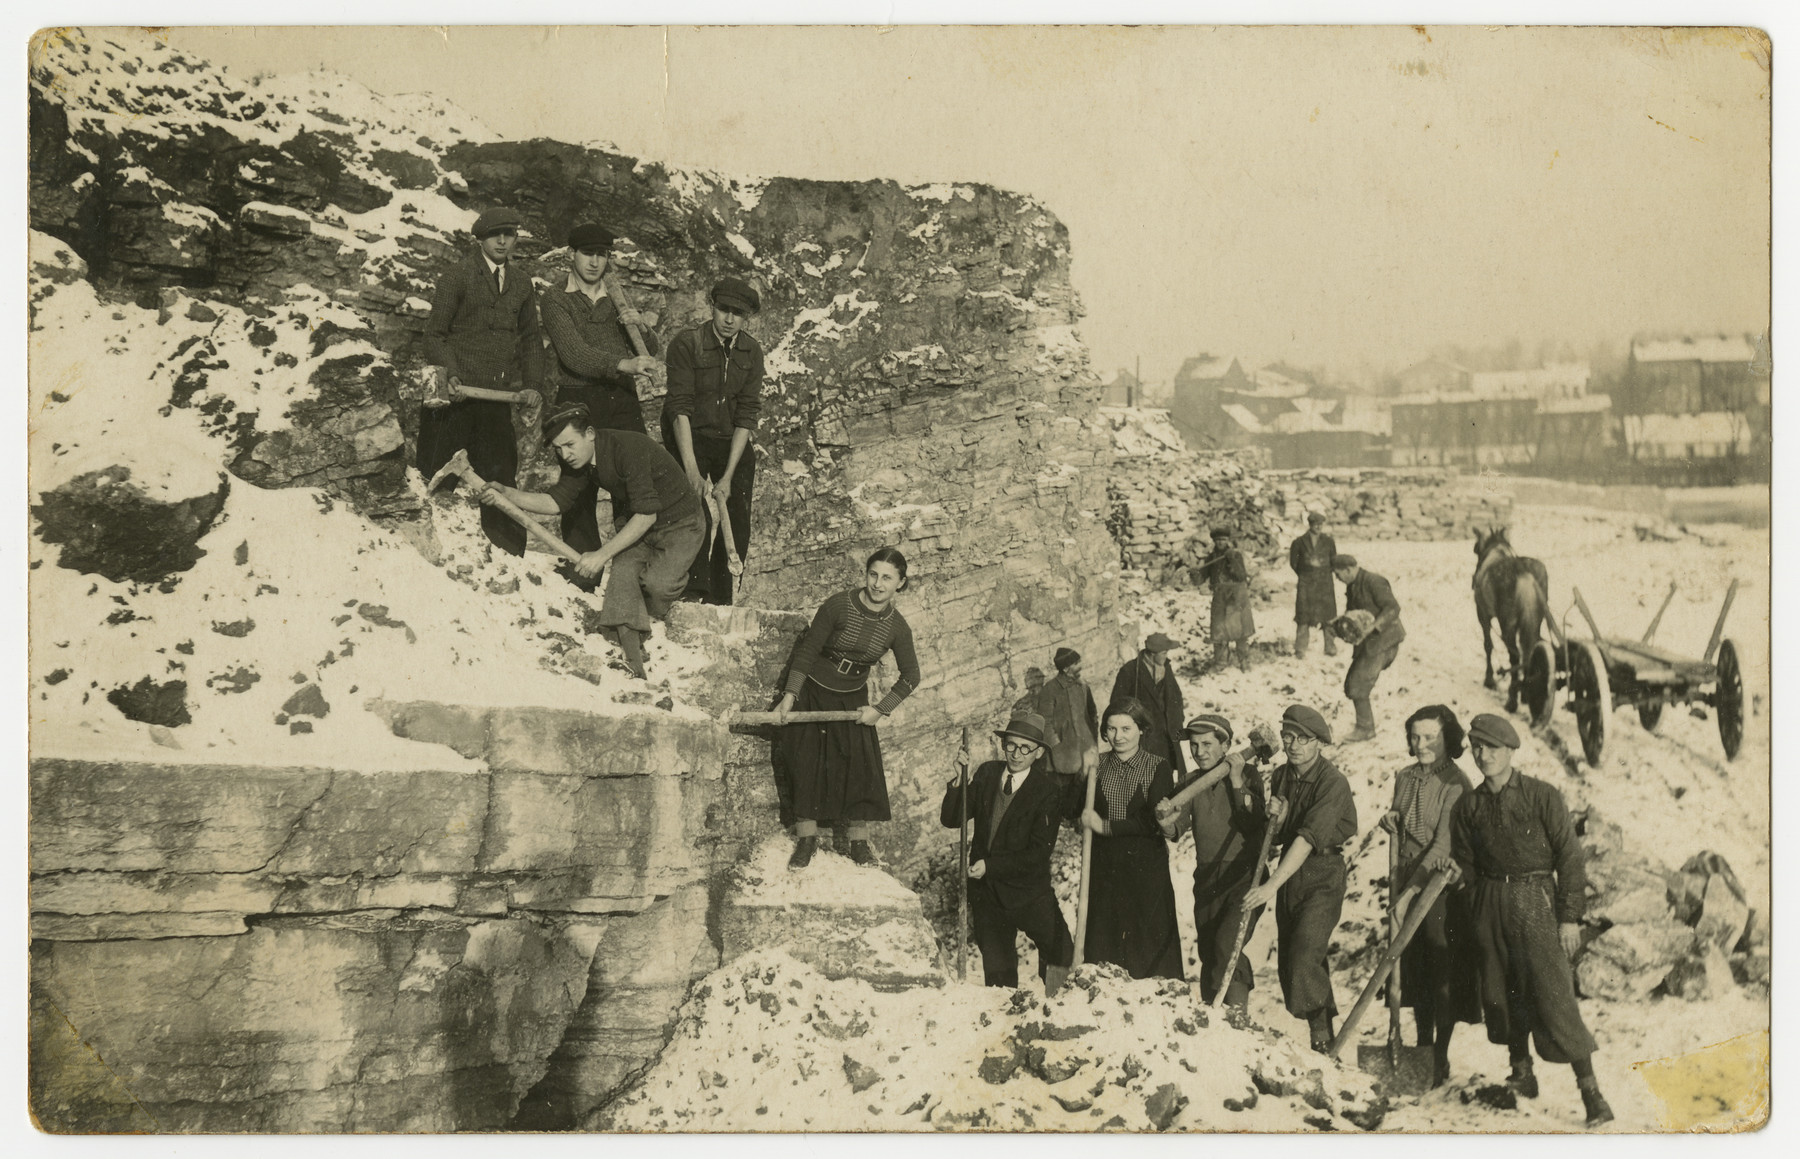 Asher Fetherhar (later Zidon) poses with members of the Hechalutz Mizrachi hachshara in Czeladz while working in a quarry.